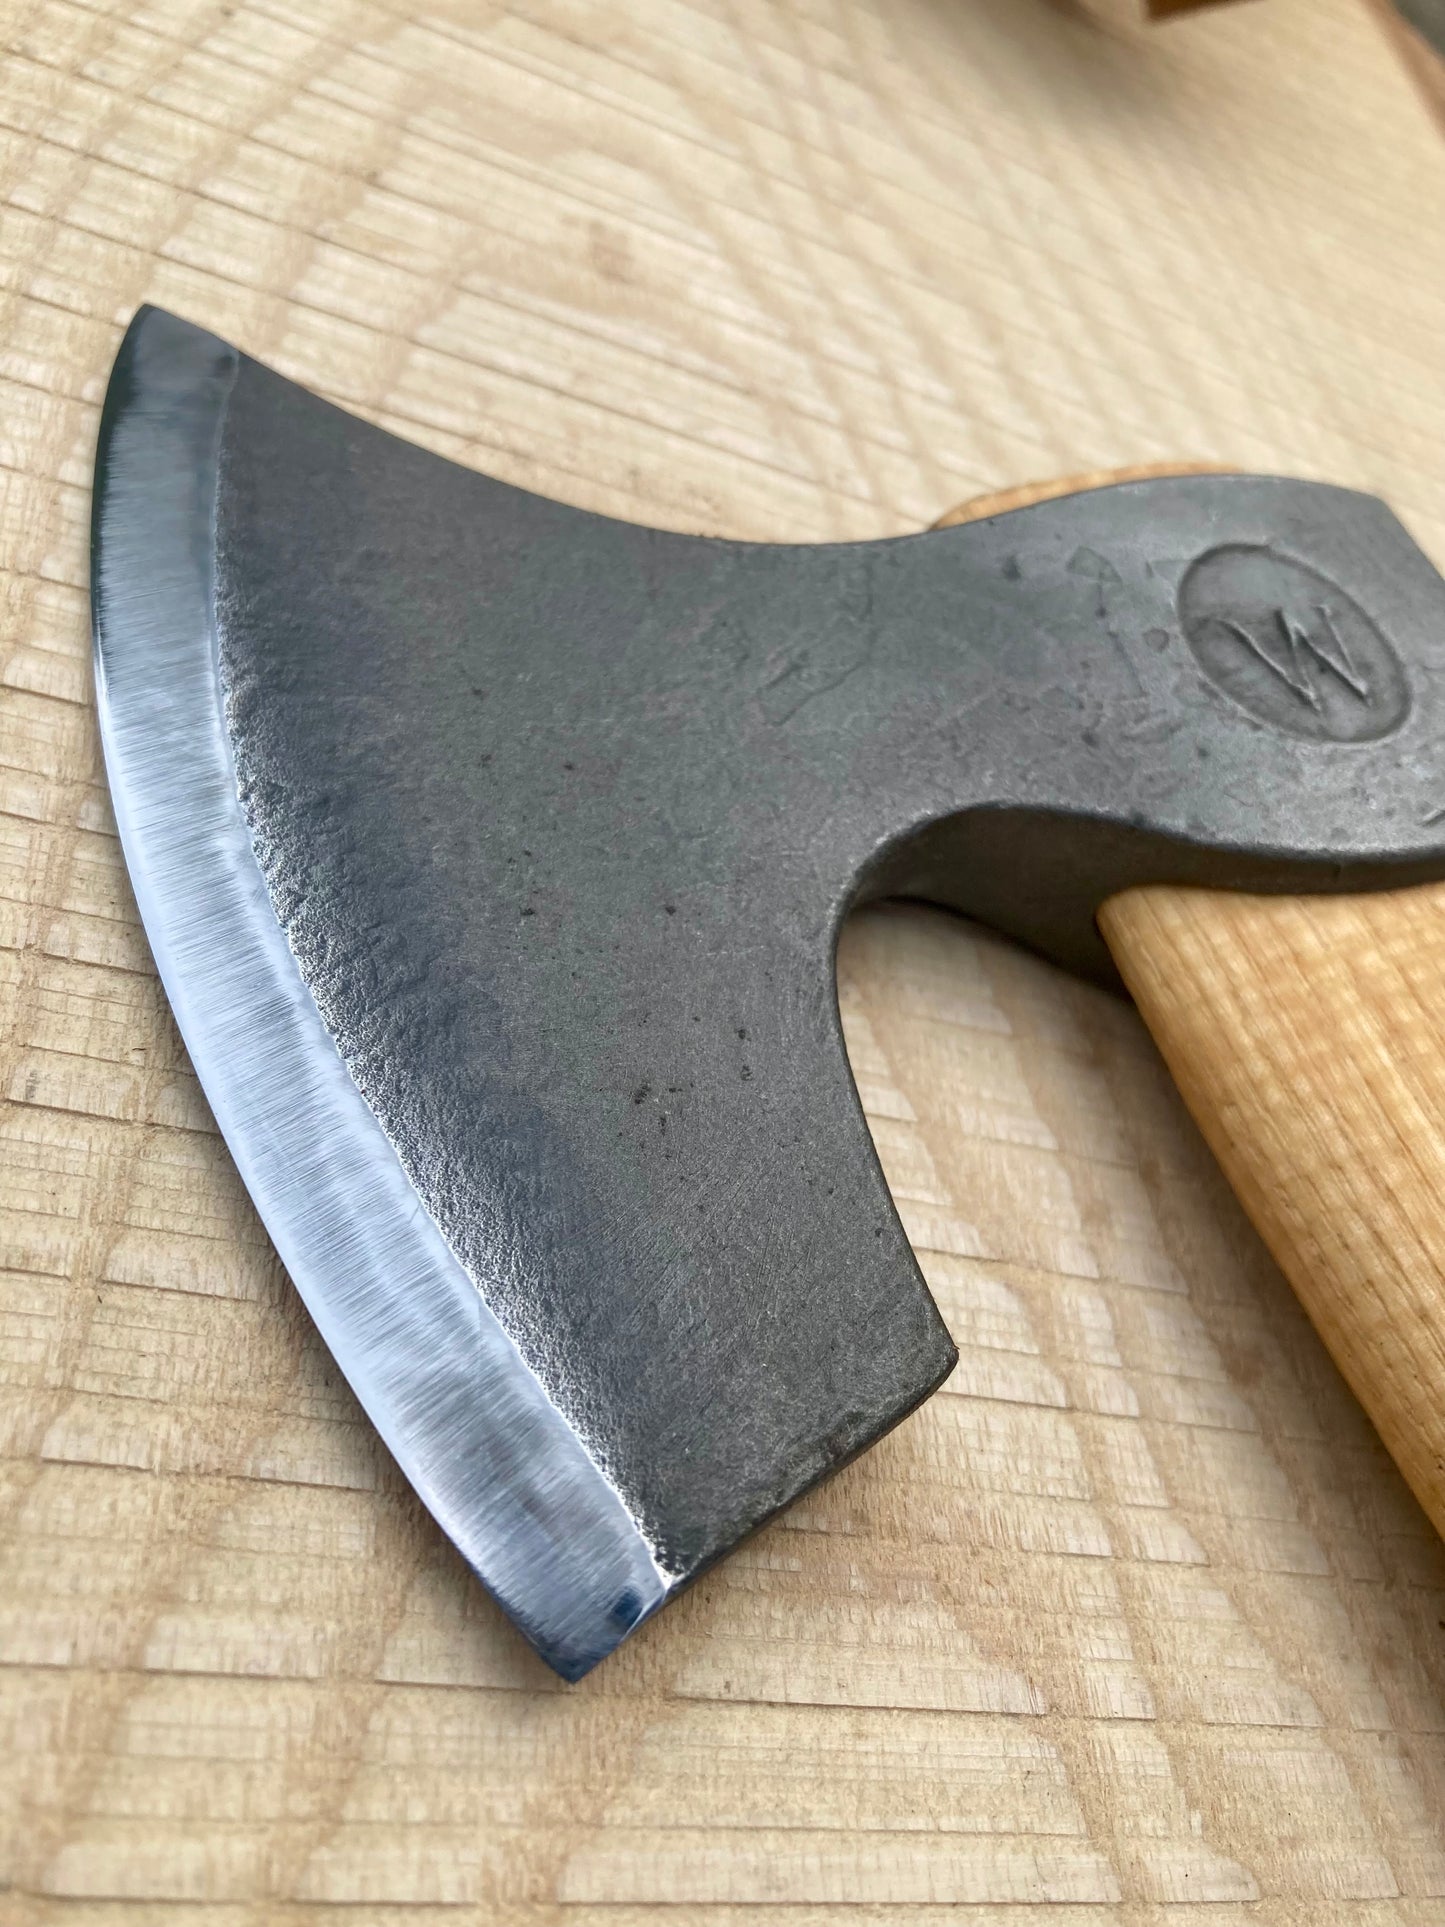 Wood Tools - Sheffield Carving Axe with Sheath